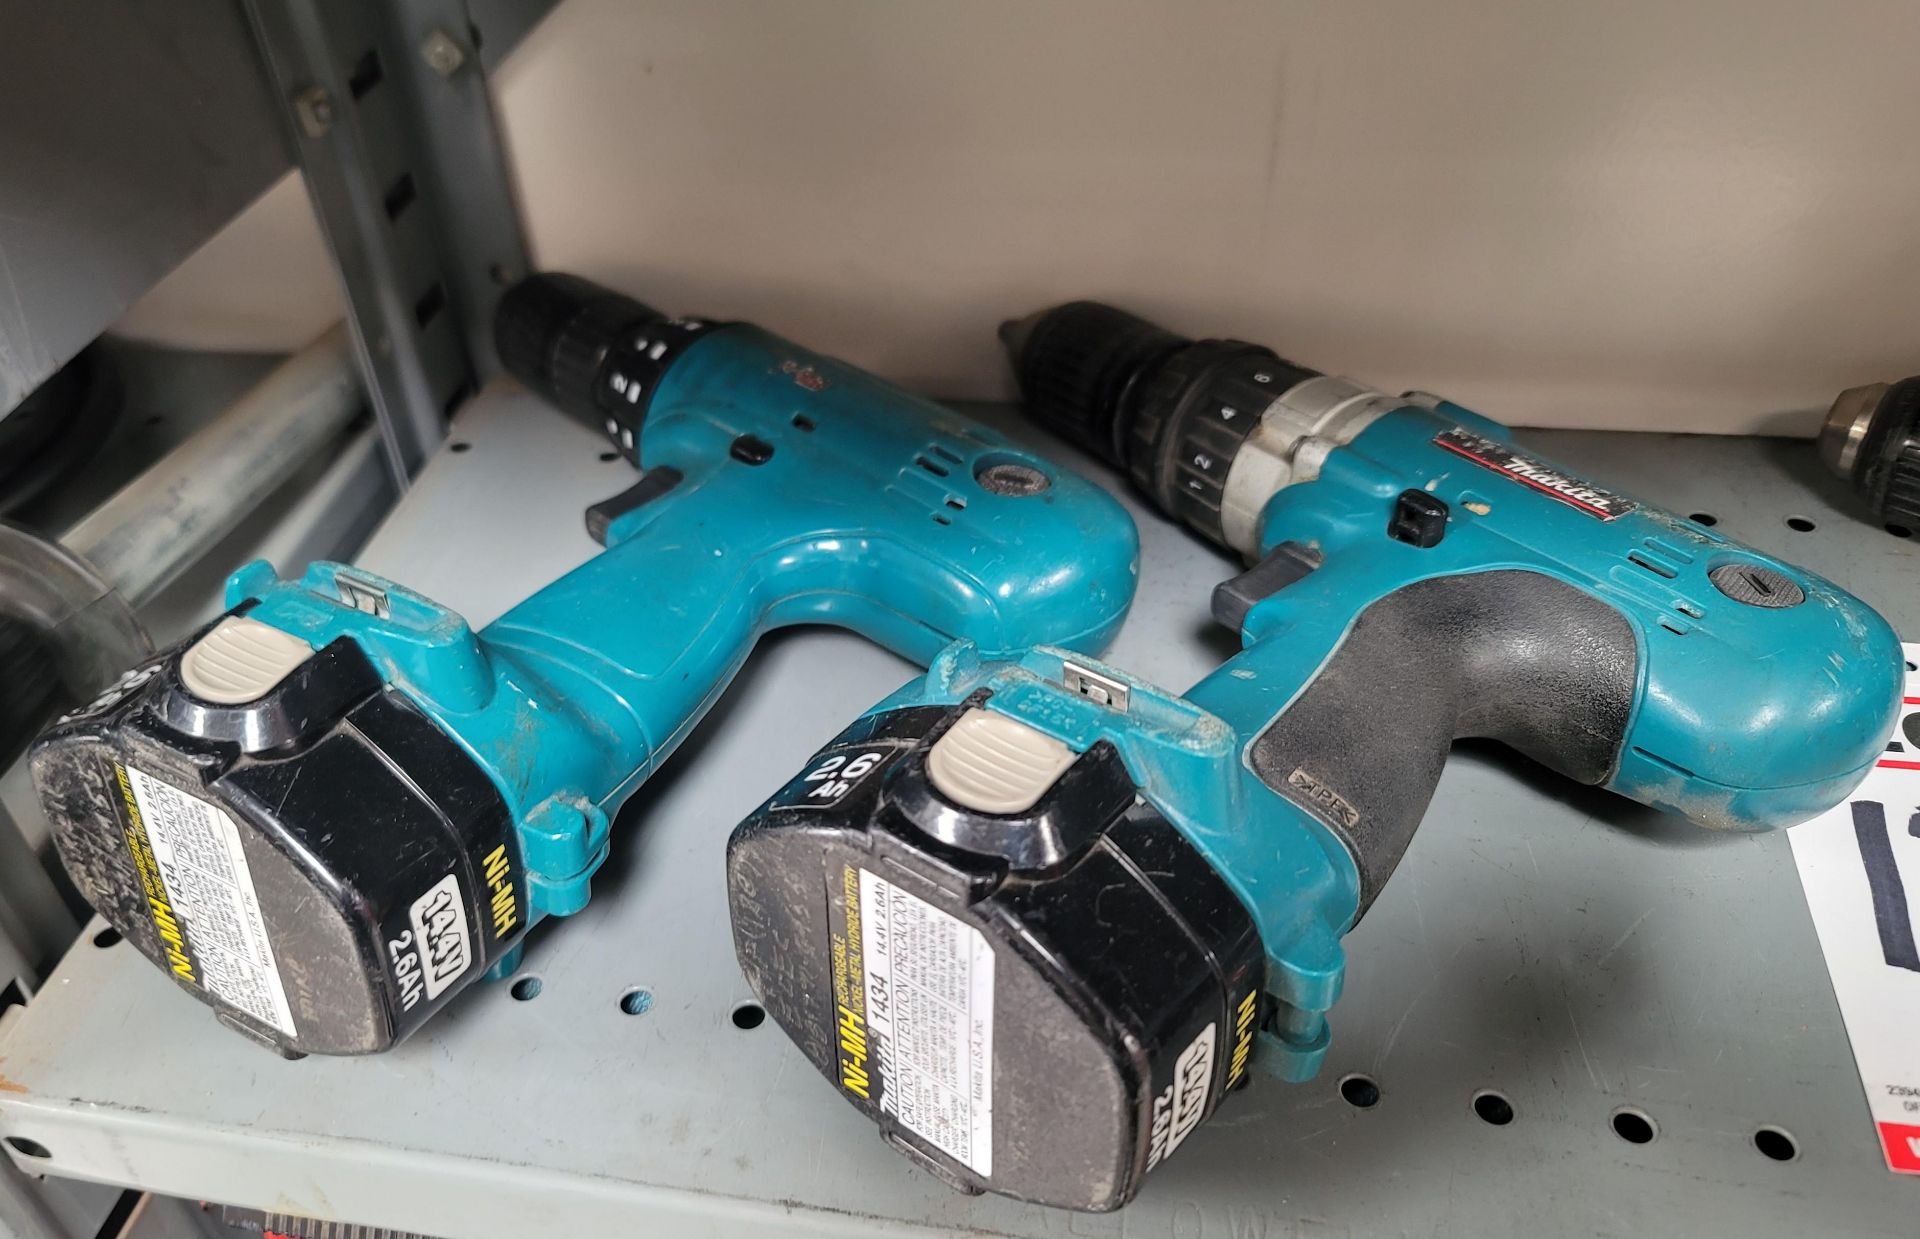 LOT - (3) MAKITA 2.6AH RECHARGEABLE DRILLS, MODEL 8433D, (3) BATTERIES, CHARGER, FLASHLIGHT - Image 3 of 3